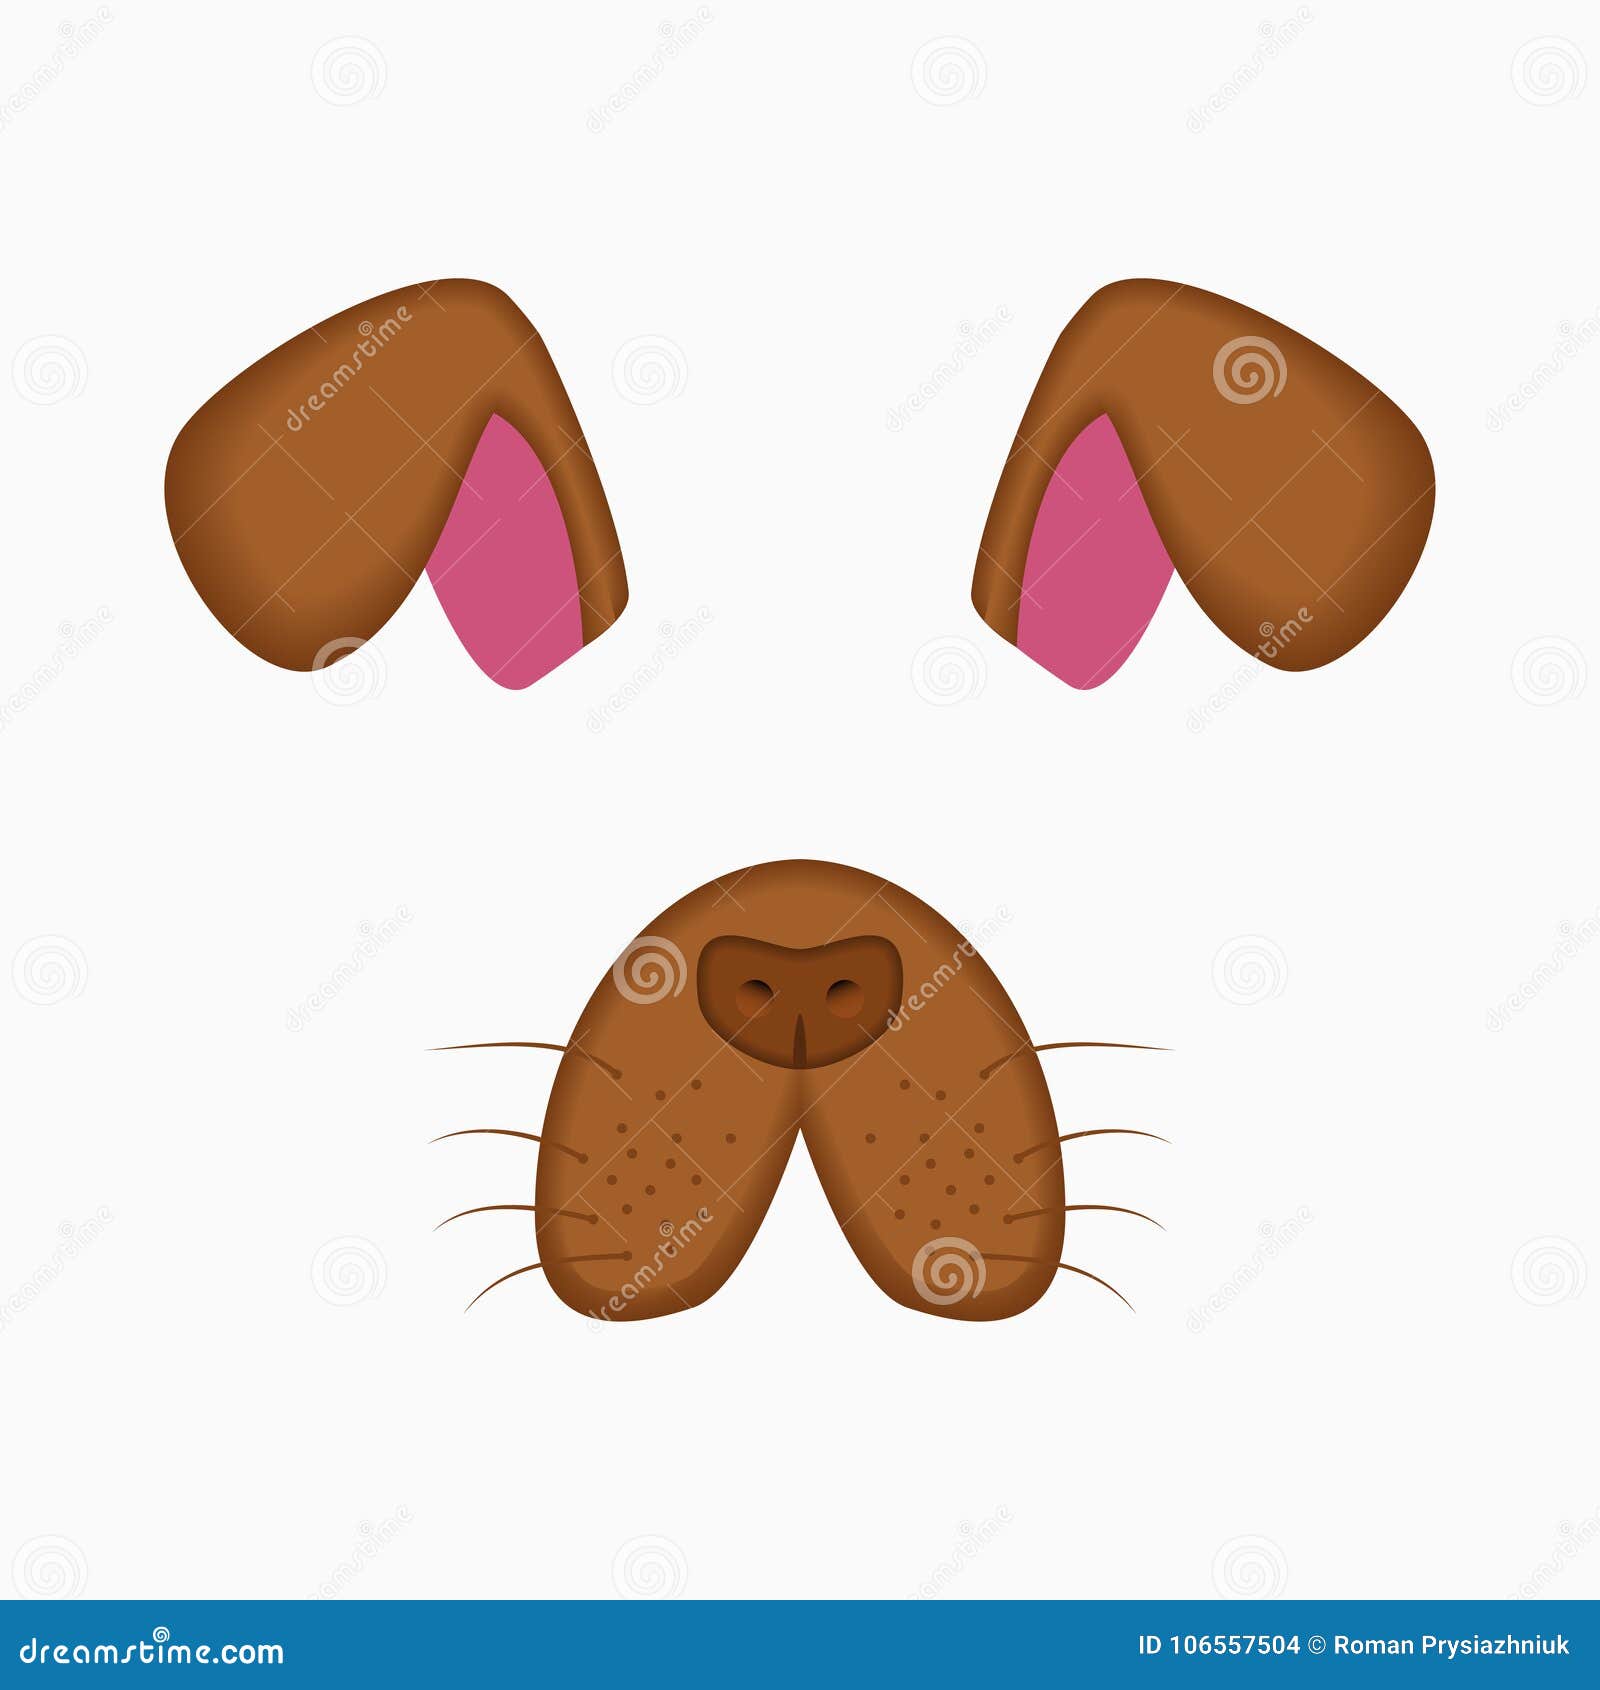 Dog Face Elements - Ears and Nose. Selfie Photo and Video Chart Filter with  Cartoon Animals Mask. Vector. Stock Vector - Illustration of animals,  design: 106557504